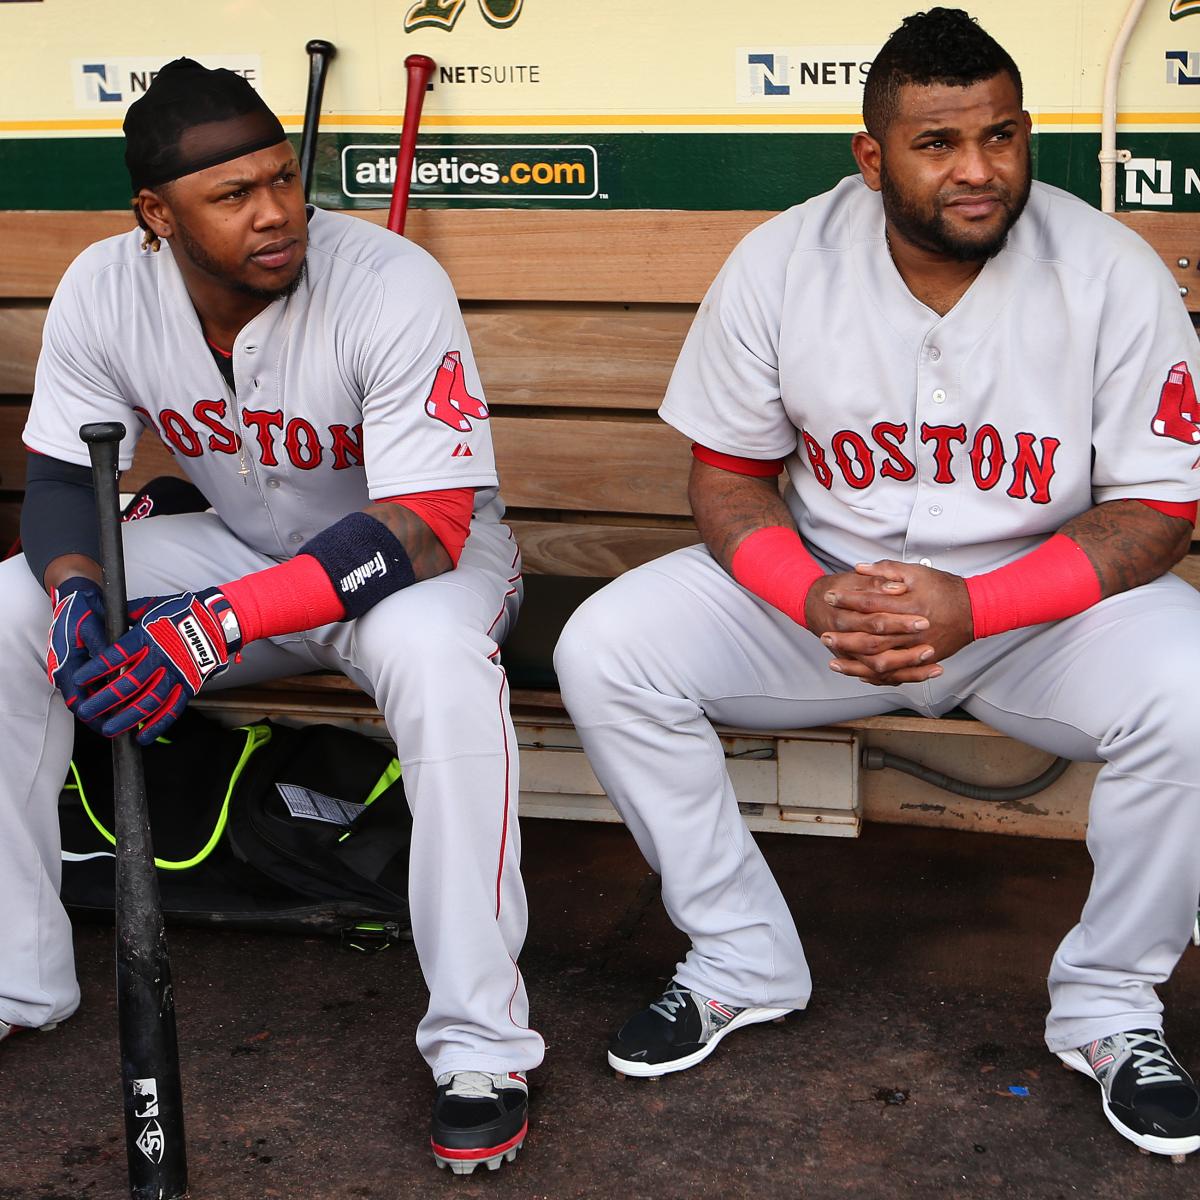 After Hanley and Pablo, a look at the AL East